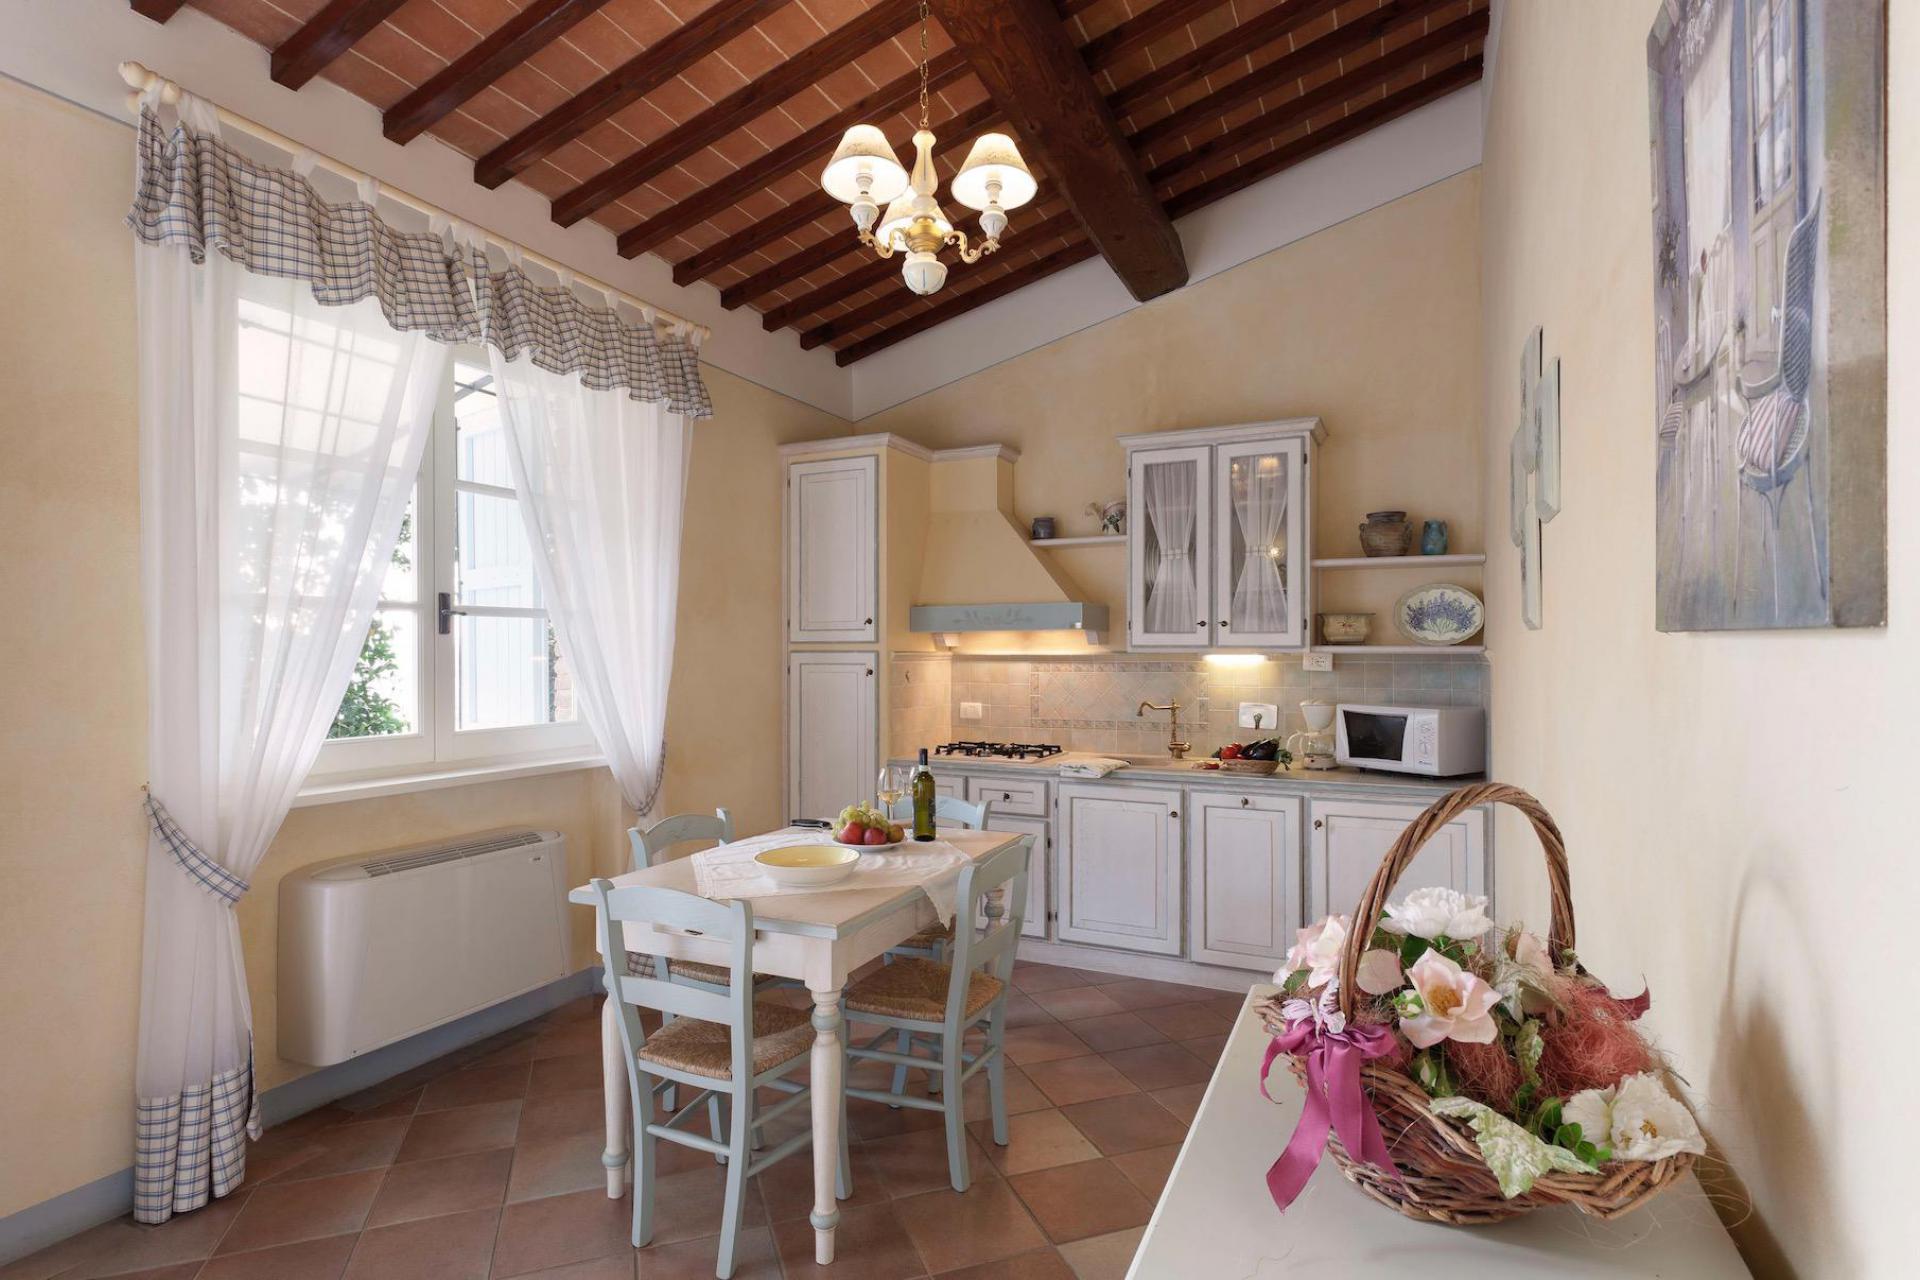 Agriturismo Tuscany Agriturismo Tuscany, very attractive and hospitable